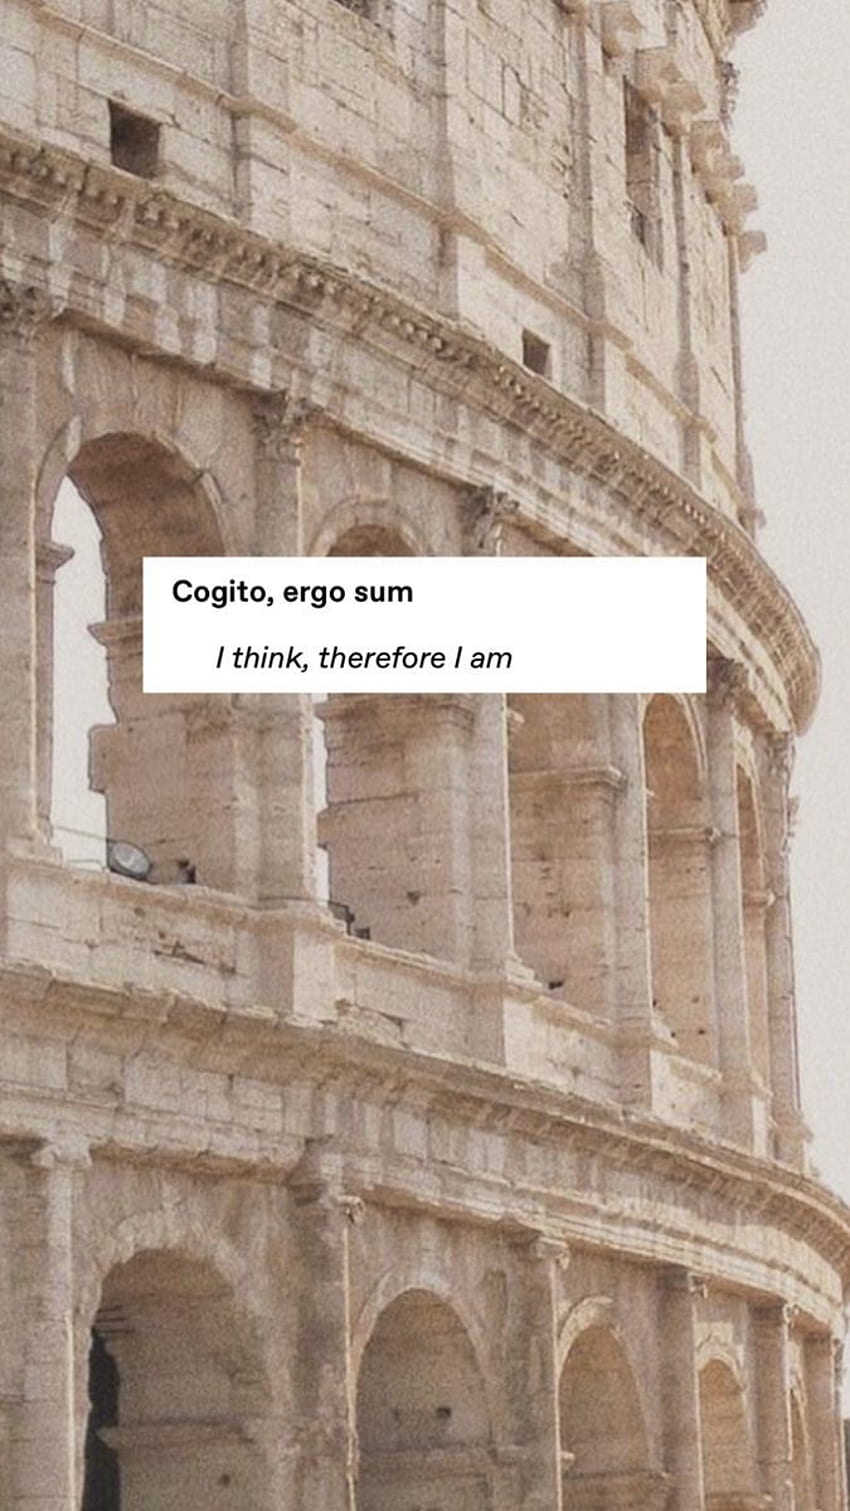 Aesthetic background image of the Colosseum with a quote in the middle that says 